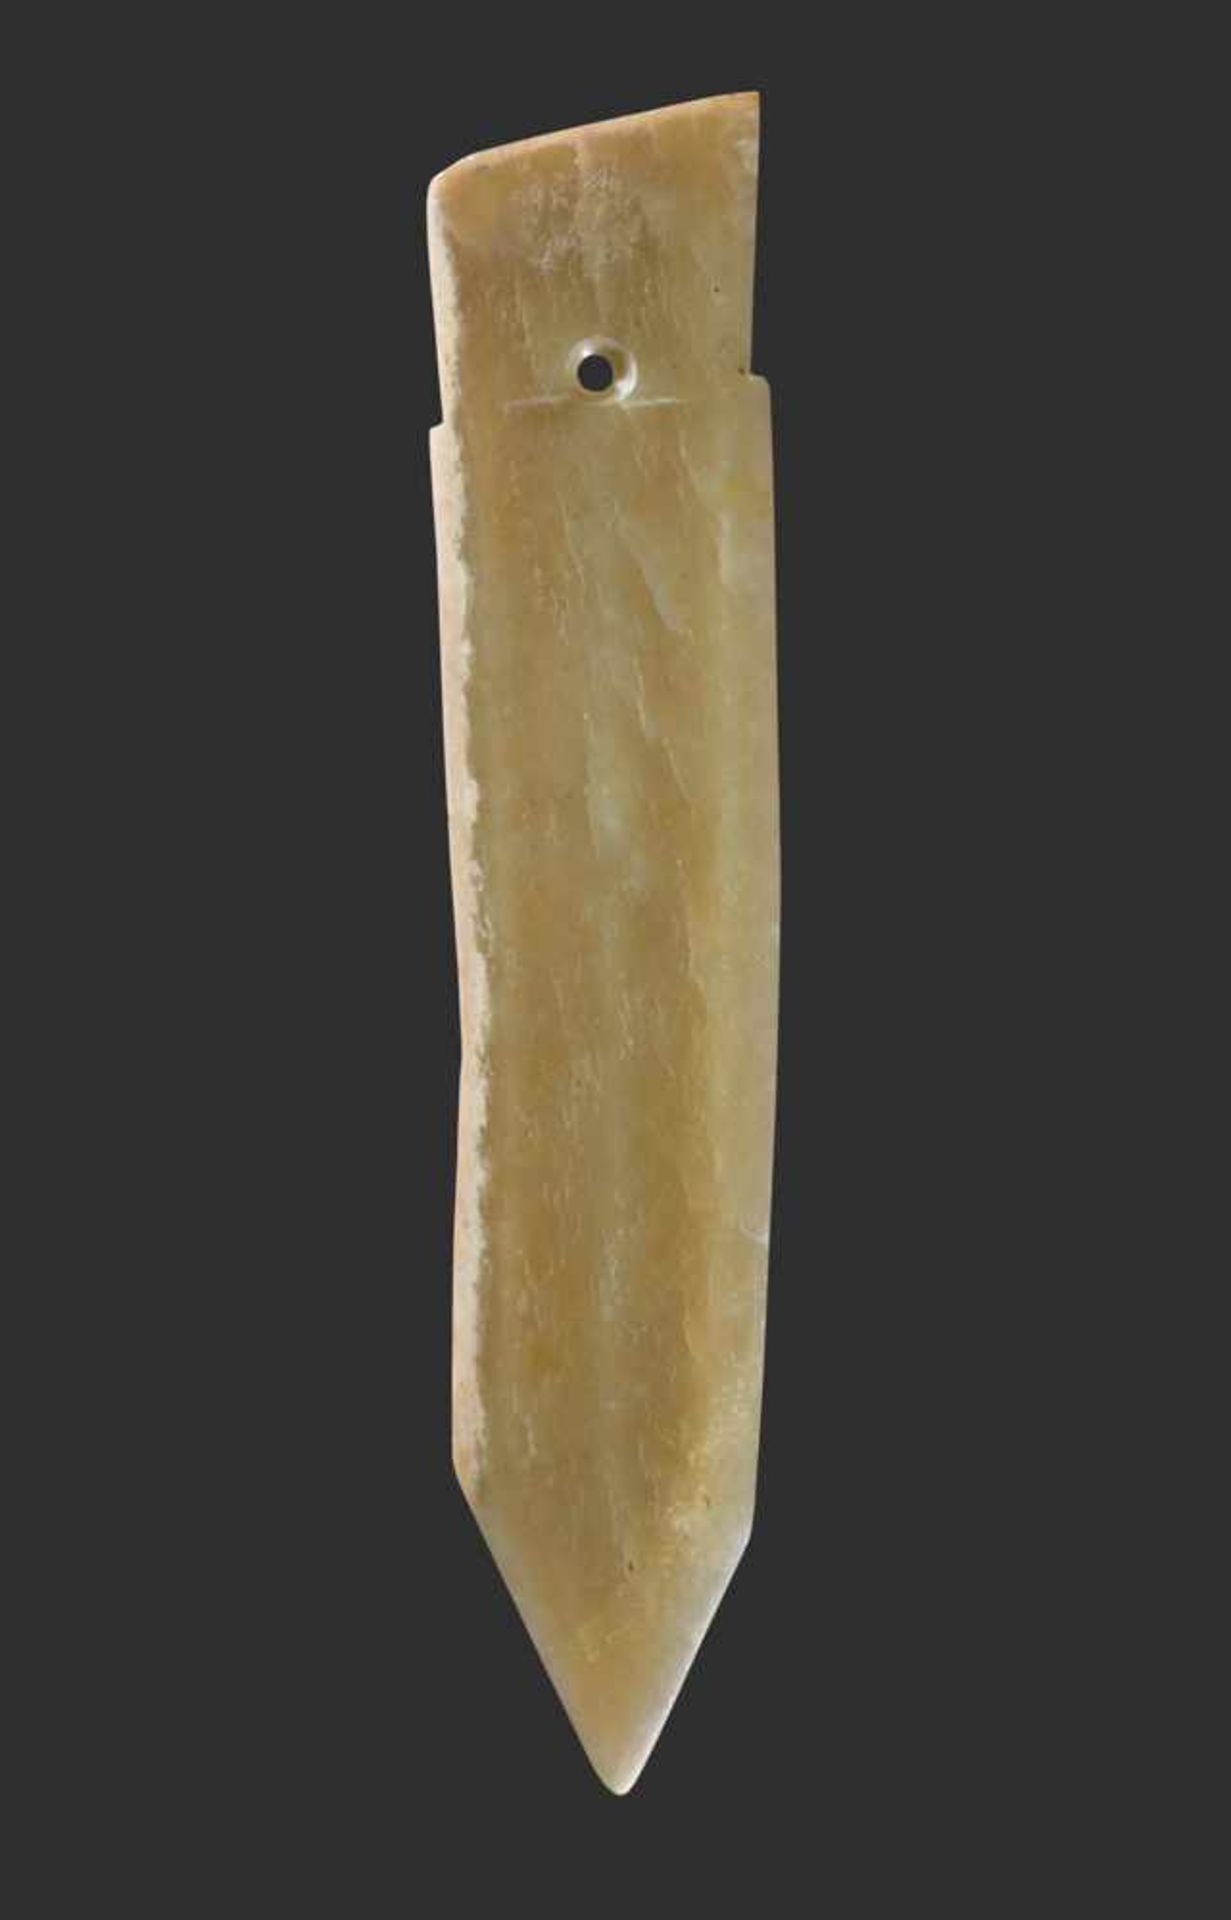 A FINELY CARVED SMALL GE DAGGER-AXE IN YELLOWISH JADE WITH DELICATE GROOVES Jade. China, Late Shang, - Image 2 of 7